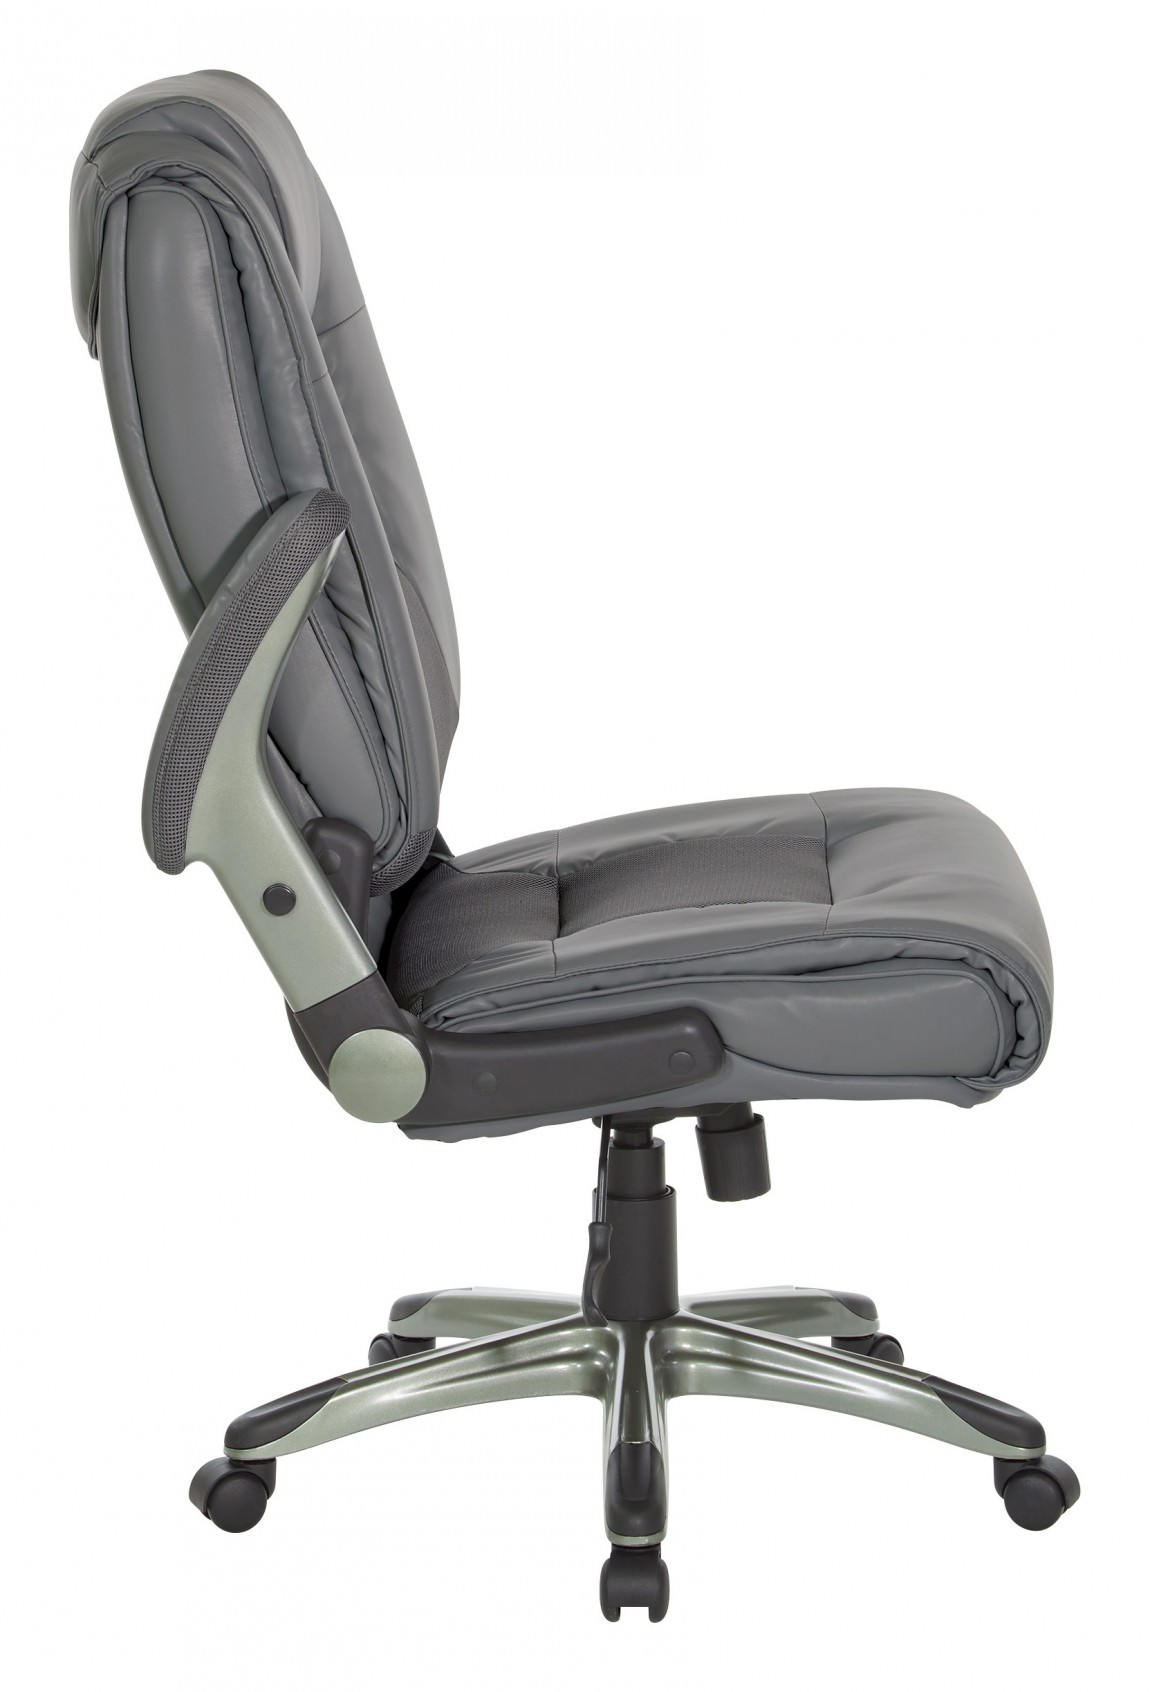 Leather Executive High Back Chair